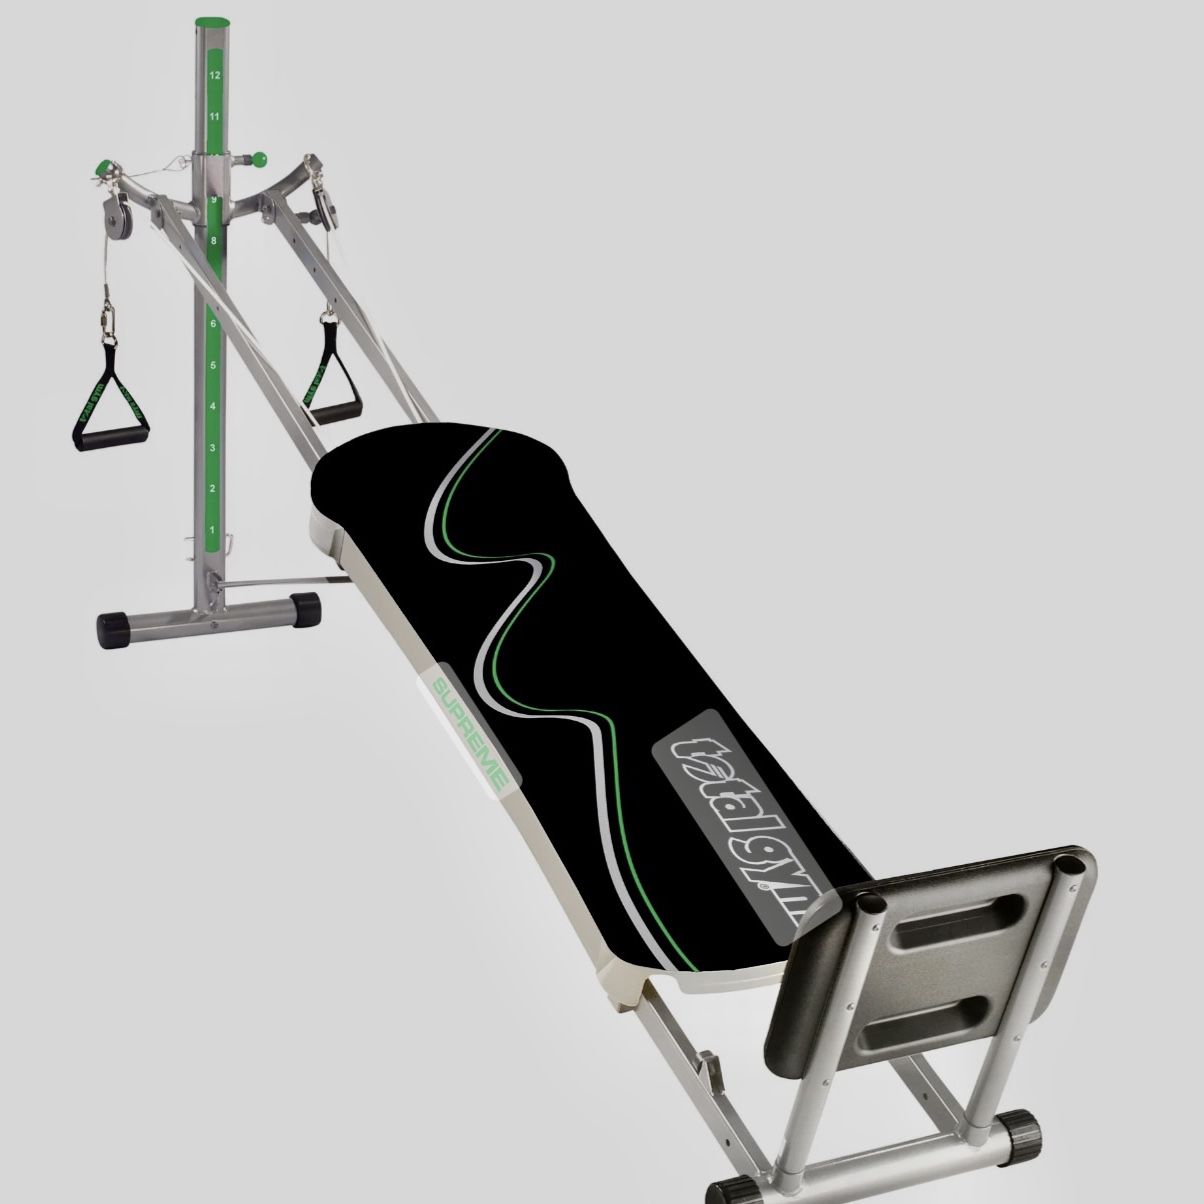 Total Gym Supreme Foldable Home Gym Supports up to 275 Pounds, Black/Green